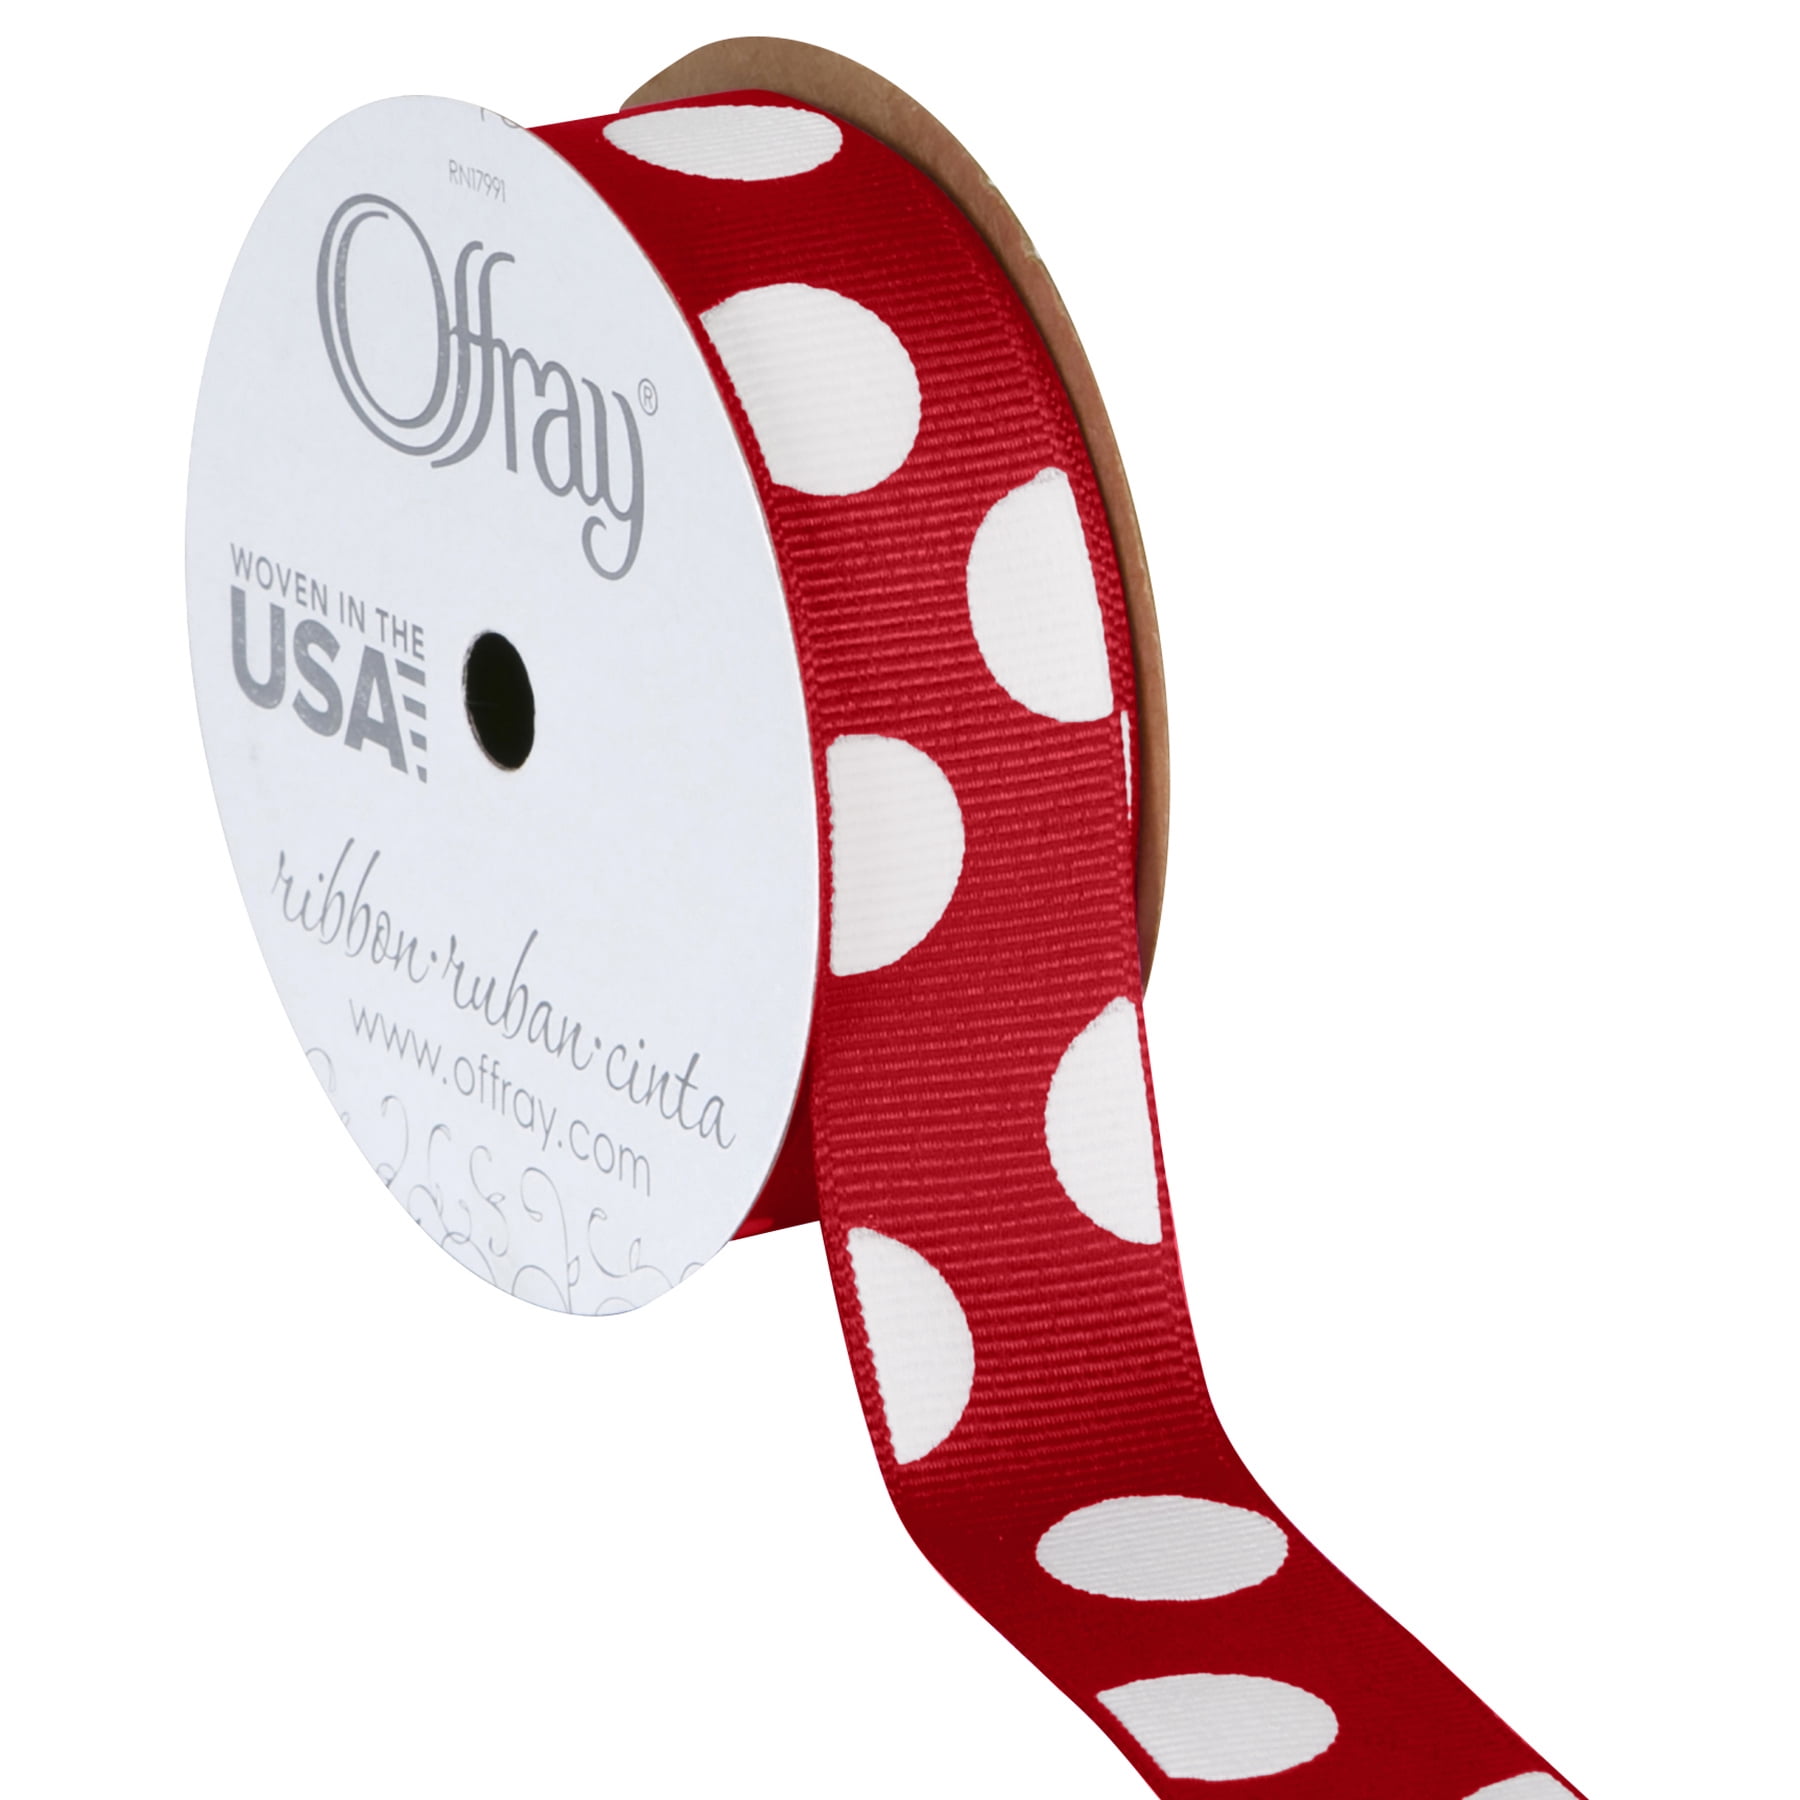 Offray Ribbon, Red with Polka Dot 7/8 inch Grosgrain Polyester Ribbon, 9 feet